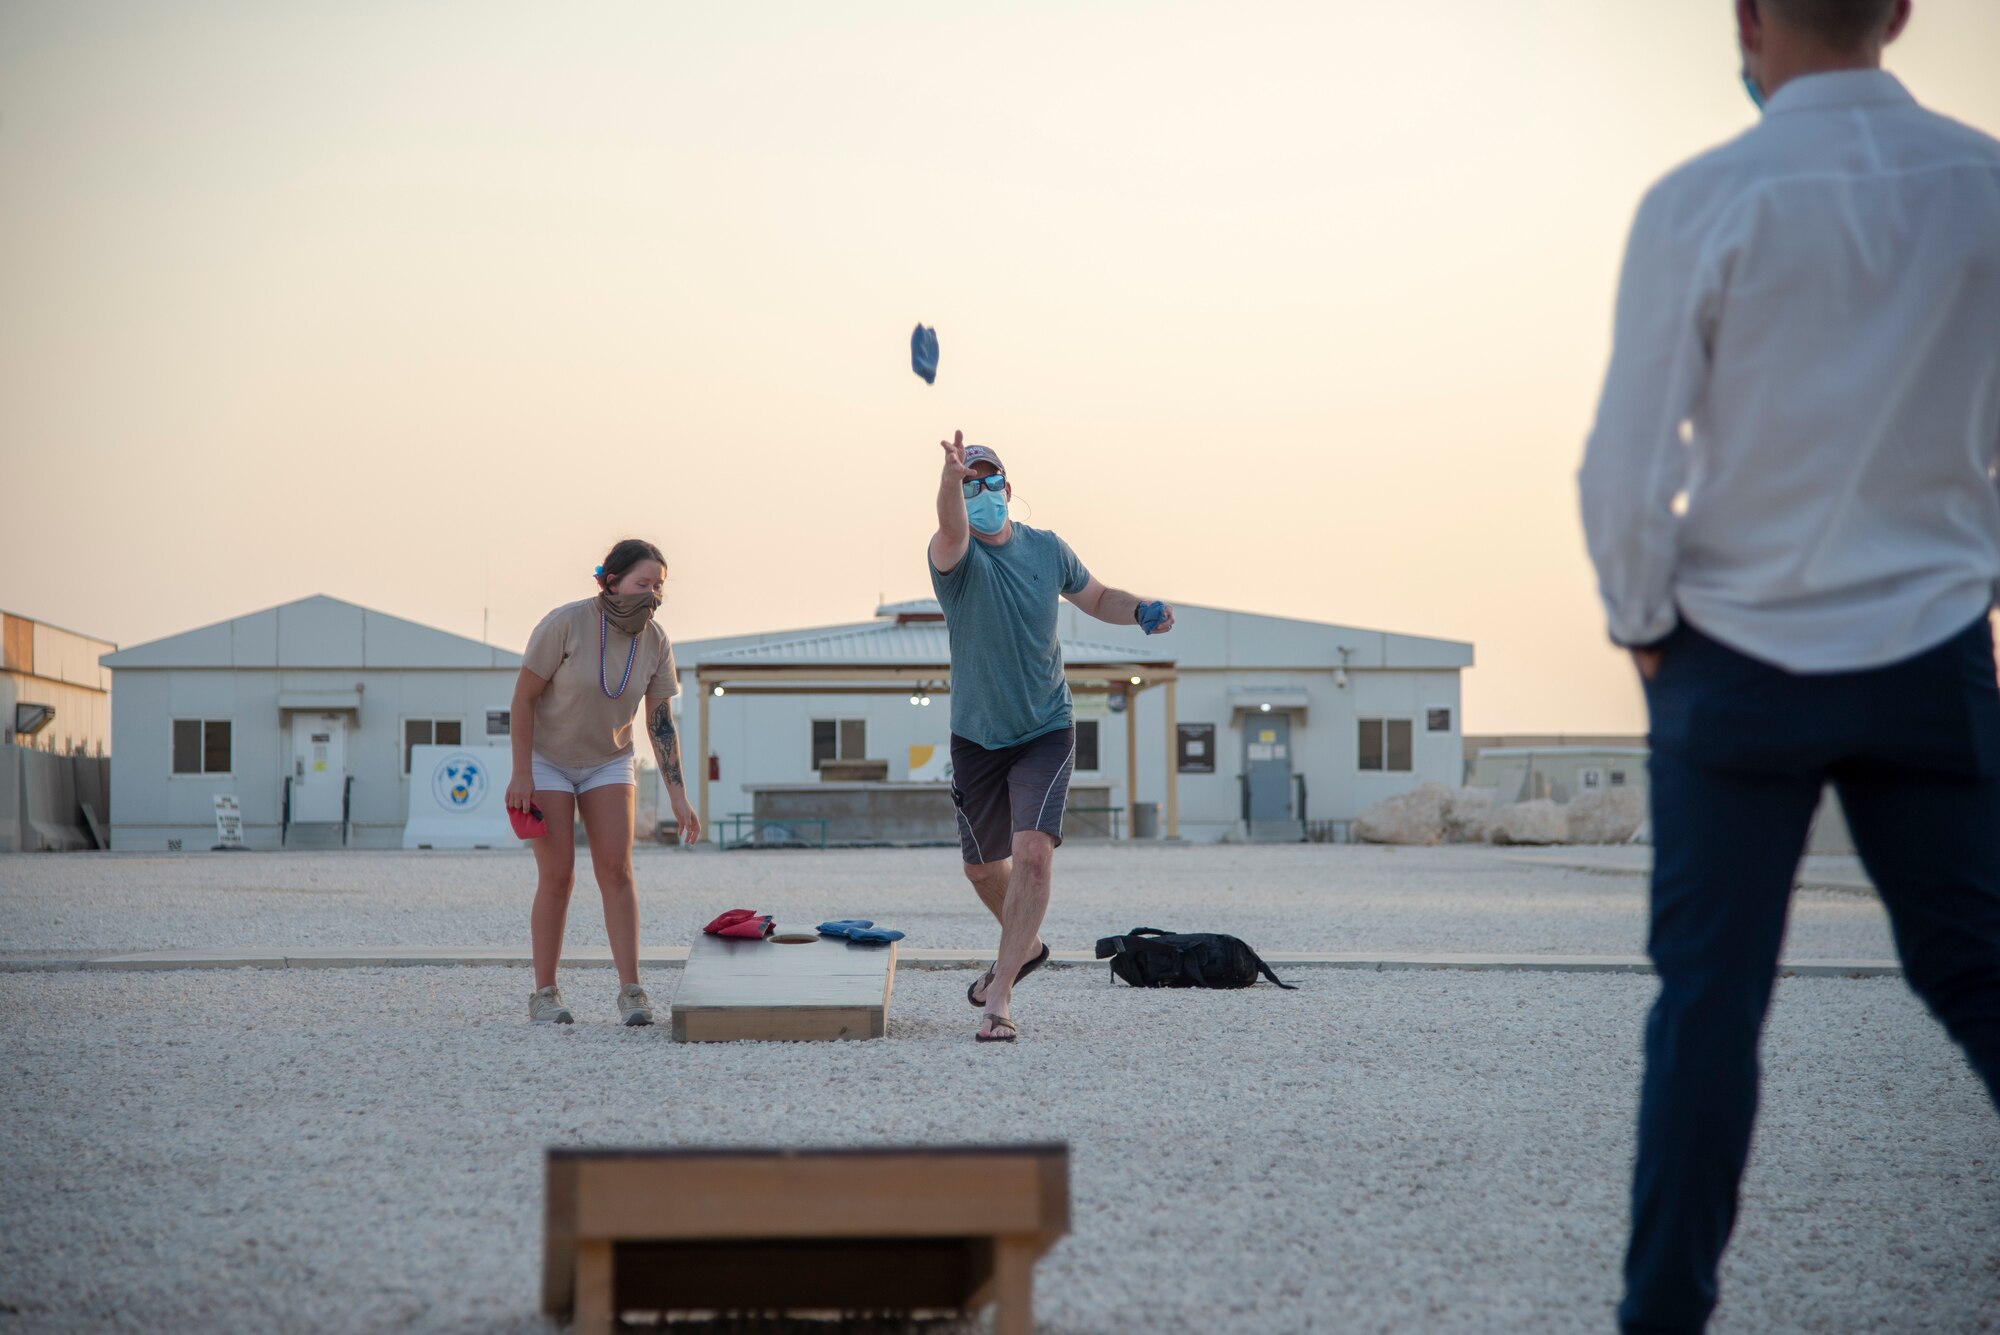 Attendees of the 4th of July celebration play in a bean bag toss tournament, July 4, 2020, Al Udeid Air Base, Qatar. Members of the 379th Expeditionary Force Support Squadron put together multiple events for their 4th of July celebration on Independence Day following strict Center for Disease Control guidance.